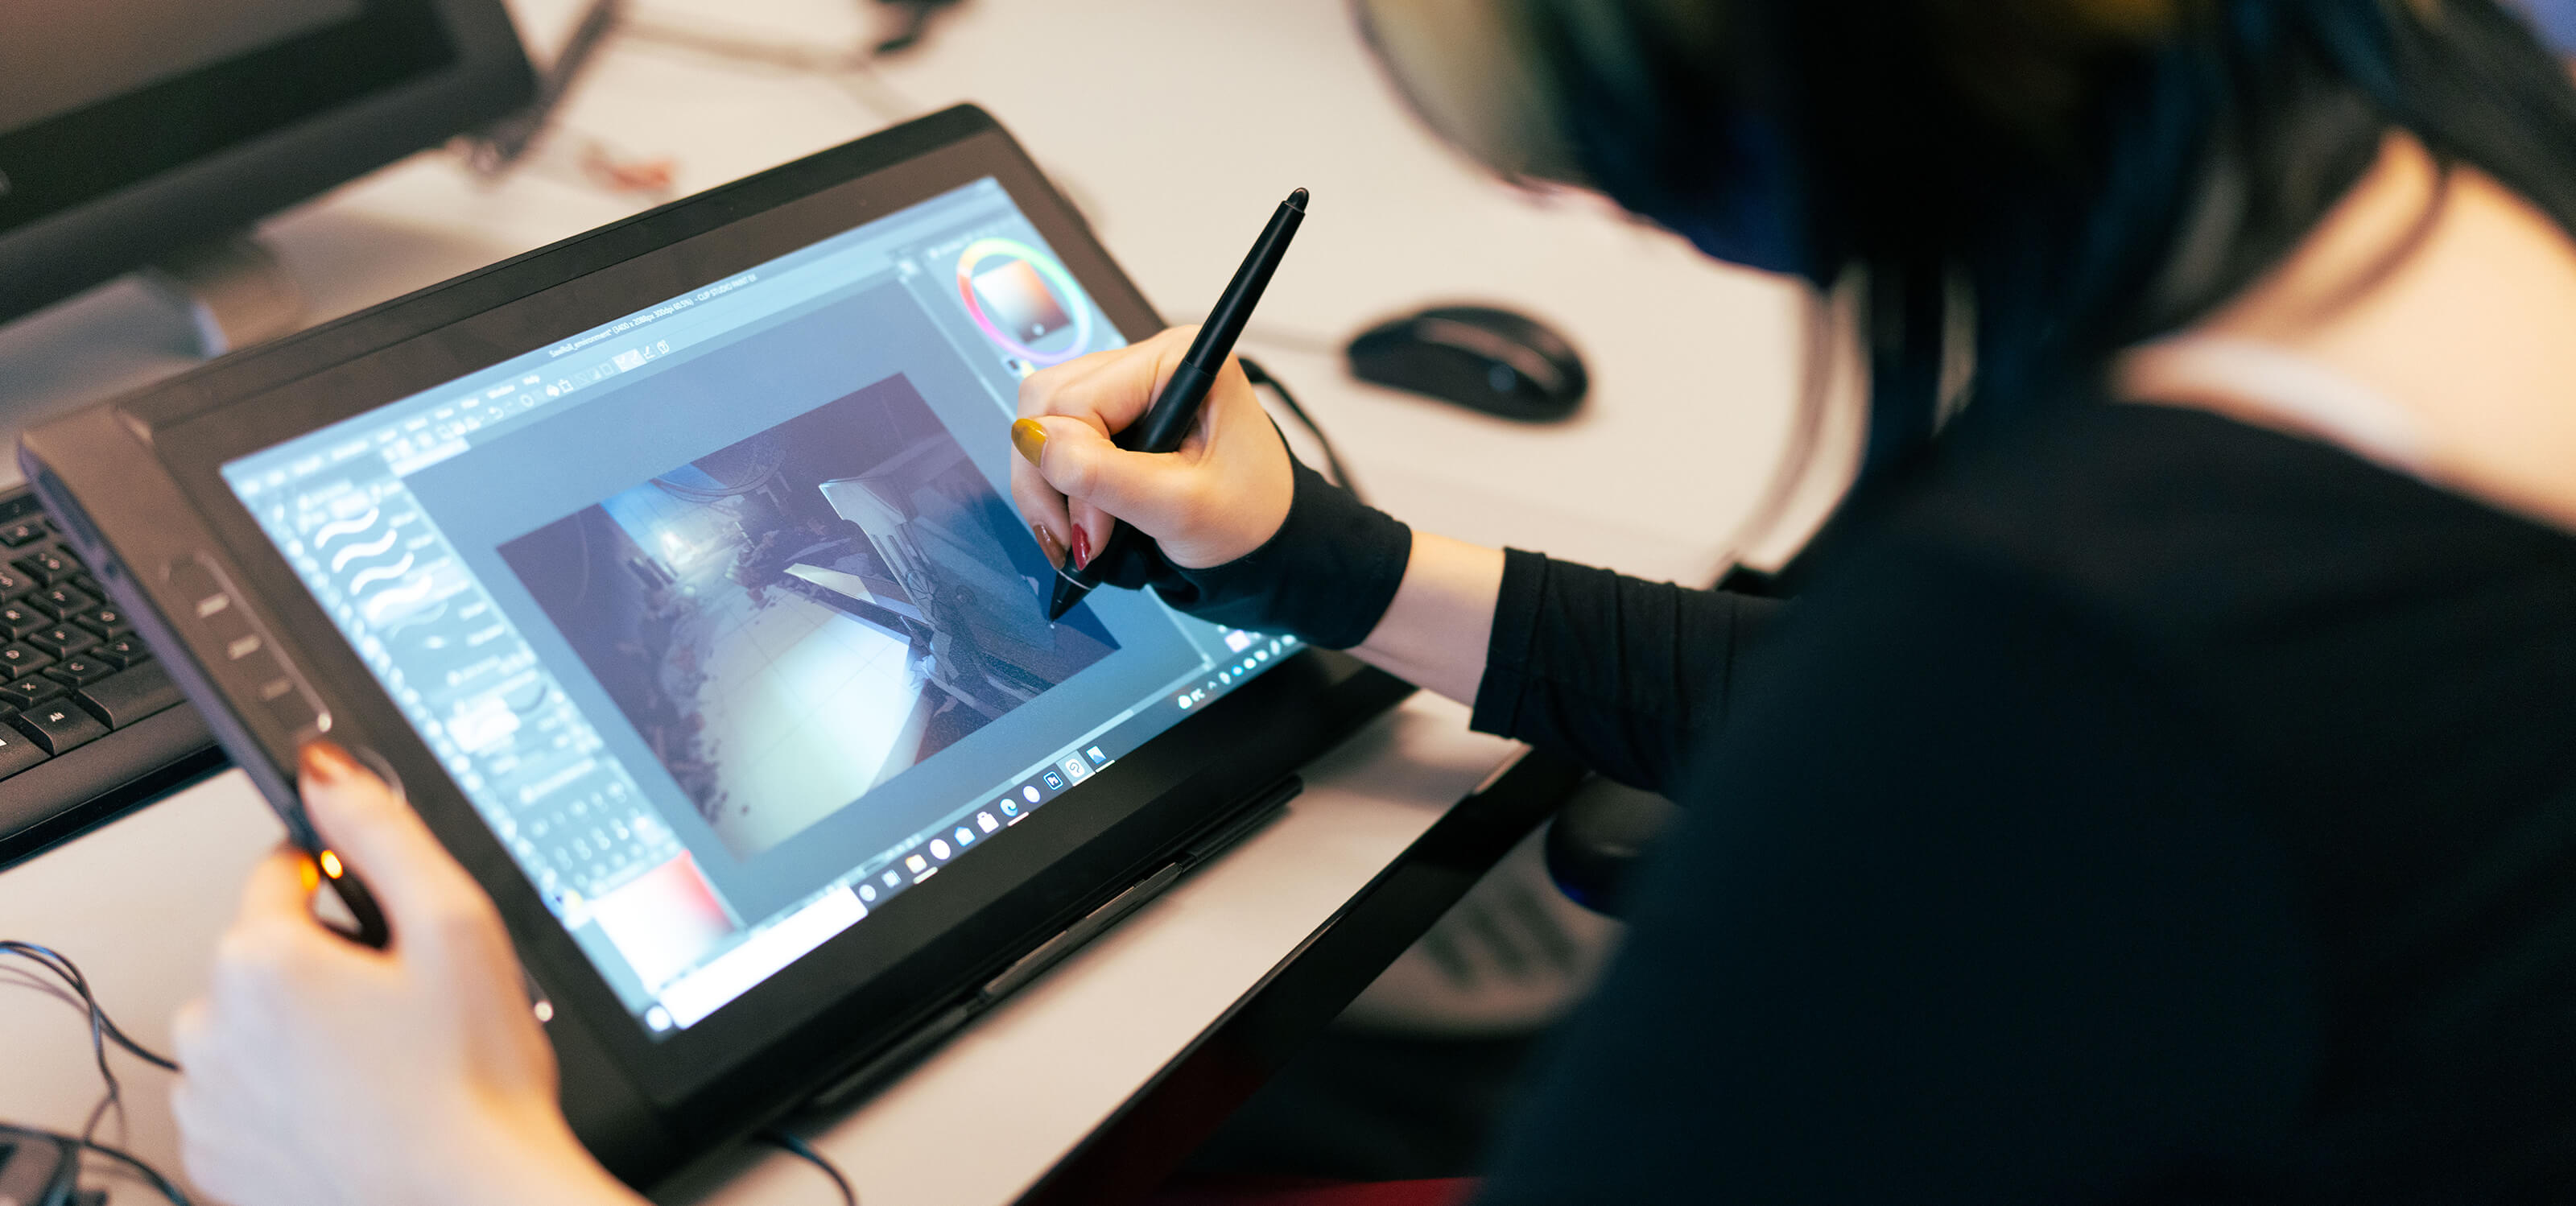 A DigiPen student works on her film team project on her drawing tablet.